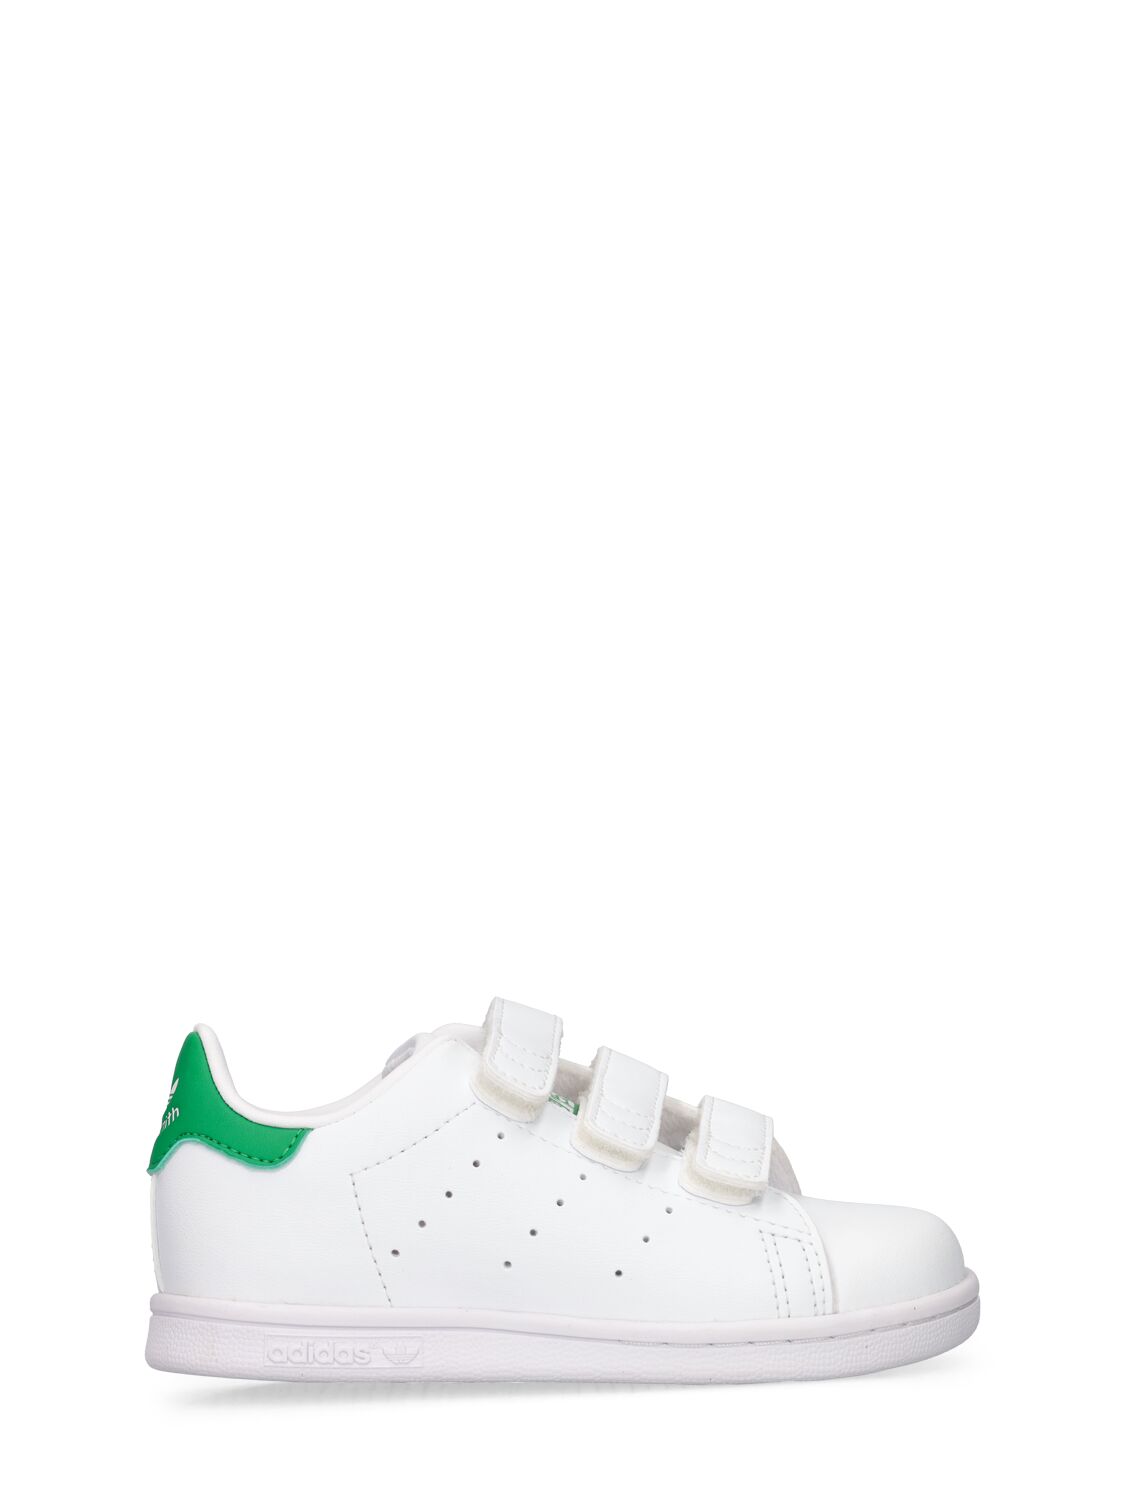 ADIDAS ORIGINALS STAN SMITH RECYCLED POLY BLEND SNEAKERS